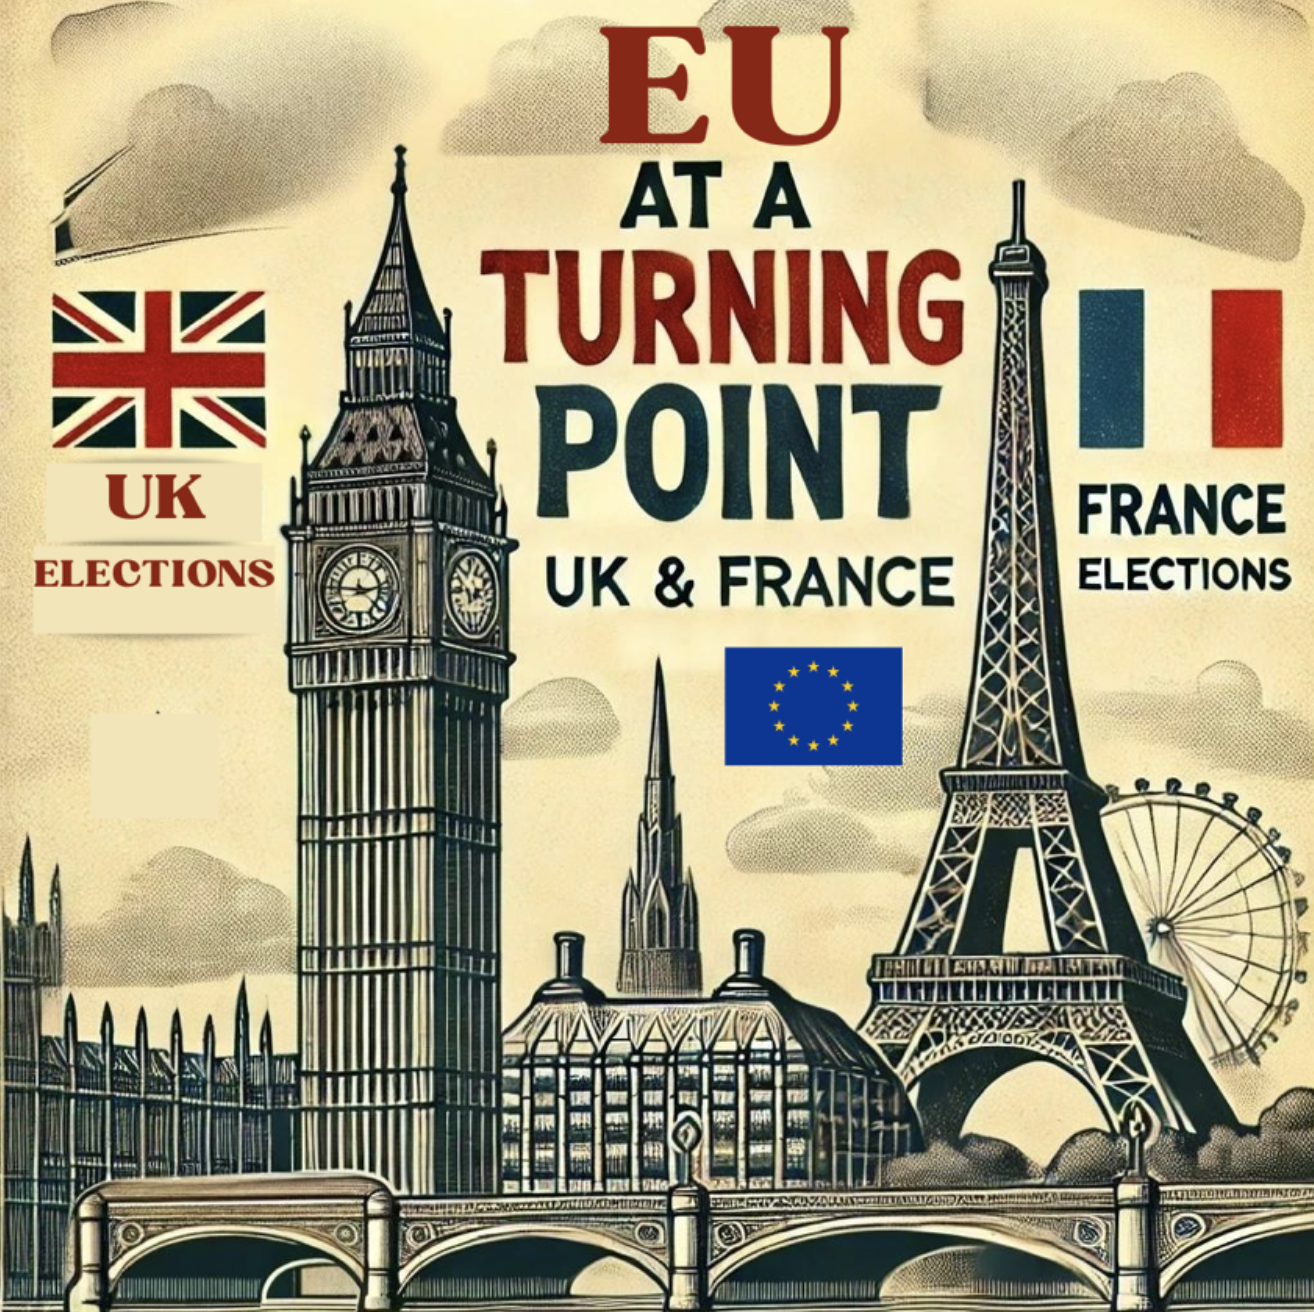 Europe at a Turning Point: UK and France Snap Elections